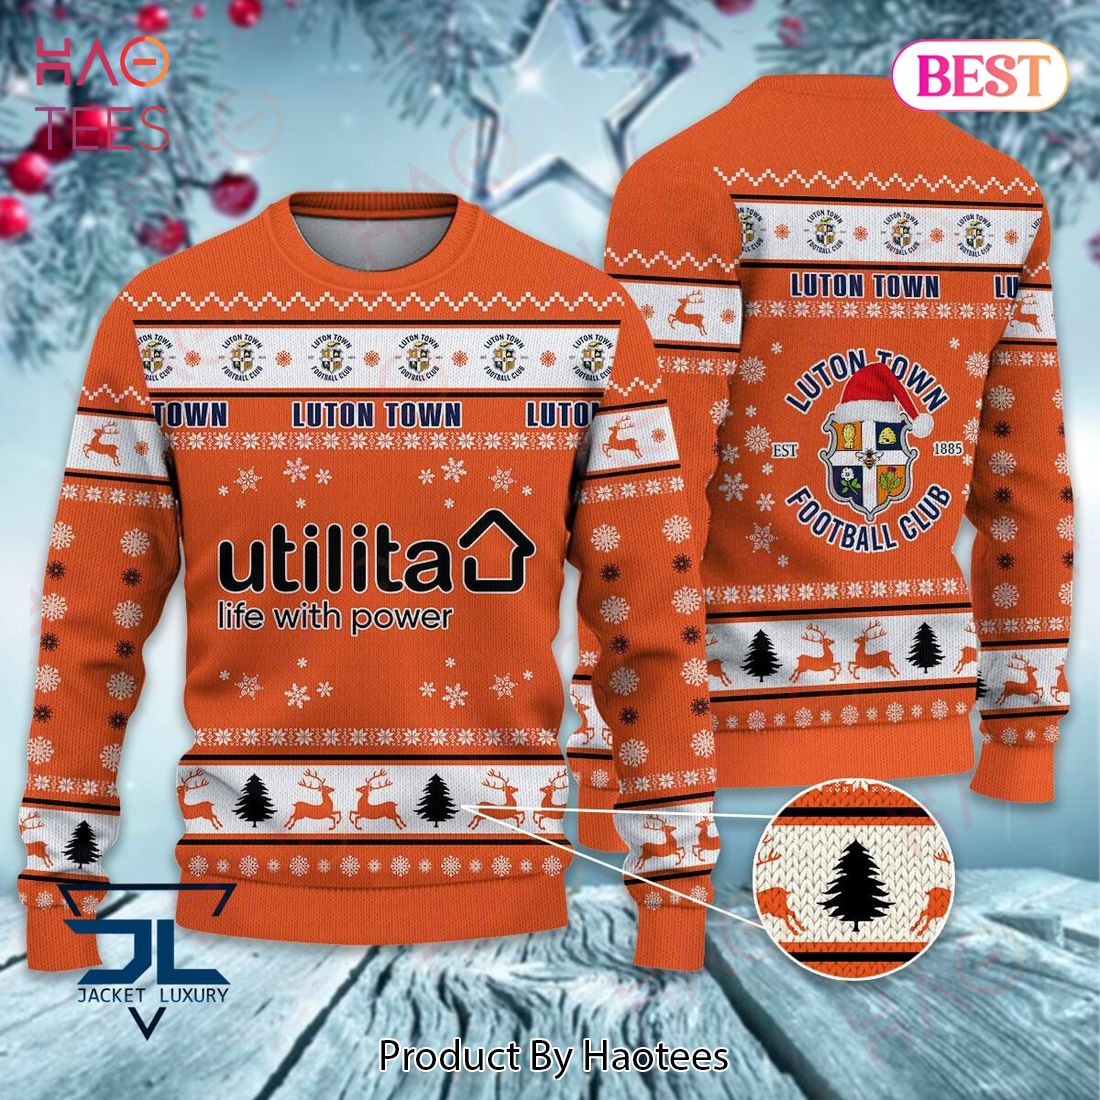 Luton Town Luxury Brand Sweater Limited Edition